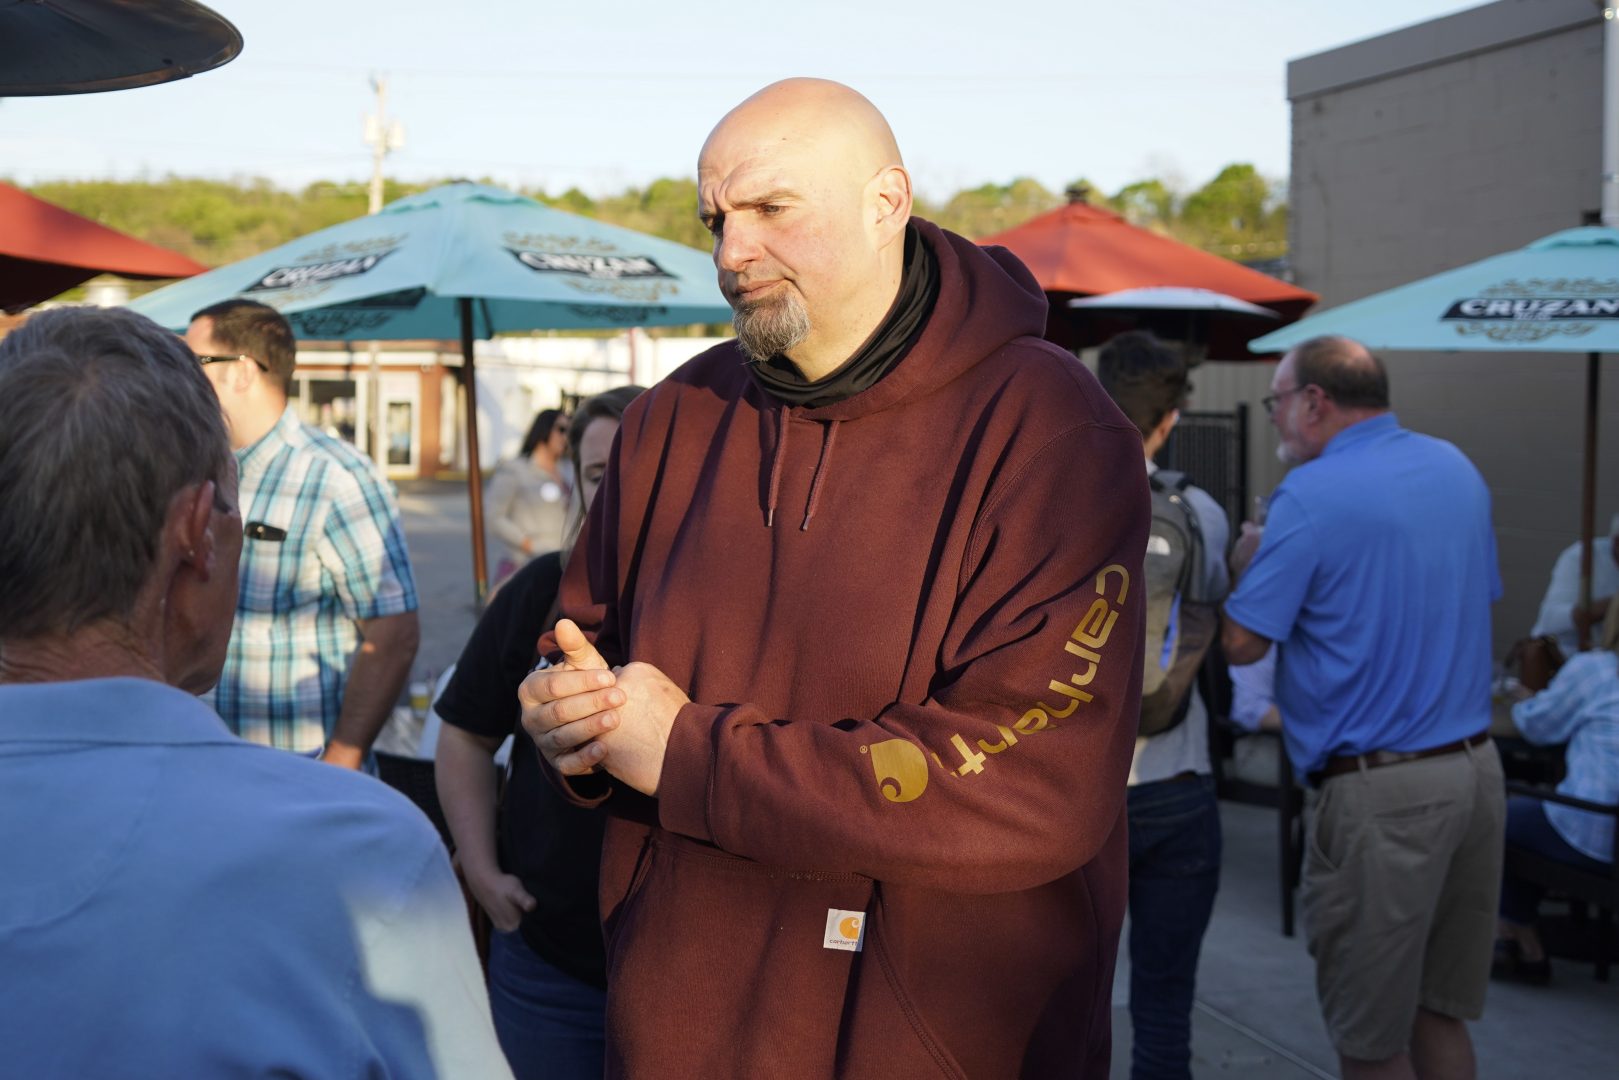 Pennsylvania Lt. Governor John Fetterman, who is the Democratic nominee for the U.S. Senate for Pennsylvania, greets supporters at a campaign stop, Tuesday, May 10, 2022, in Greensburg, Pa. 